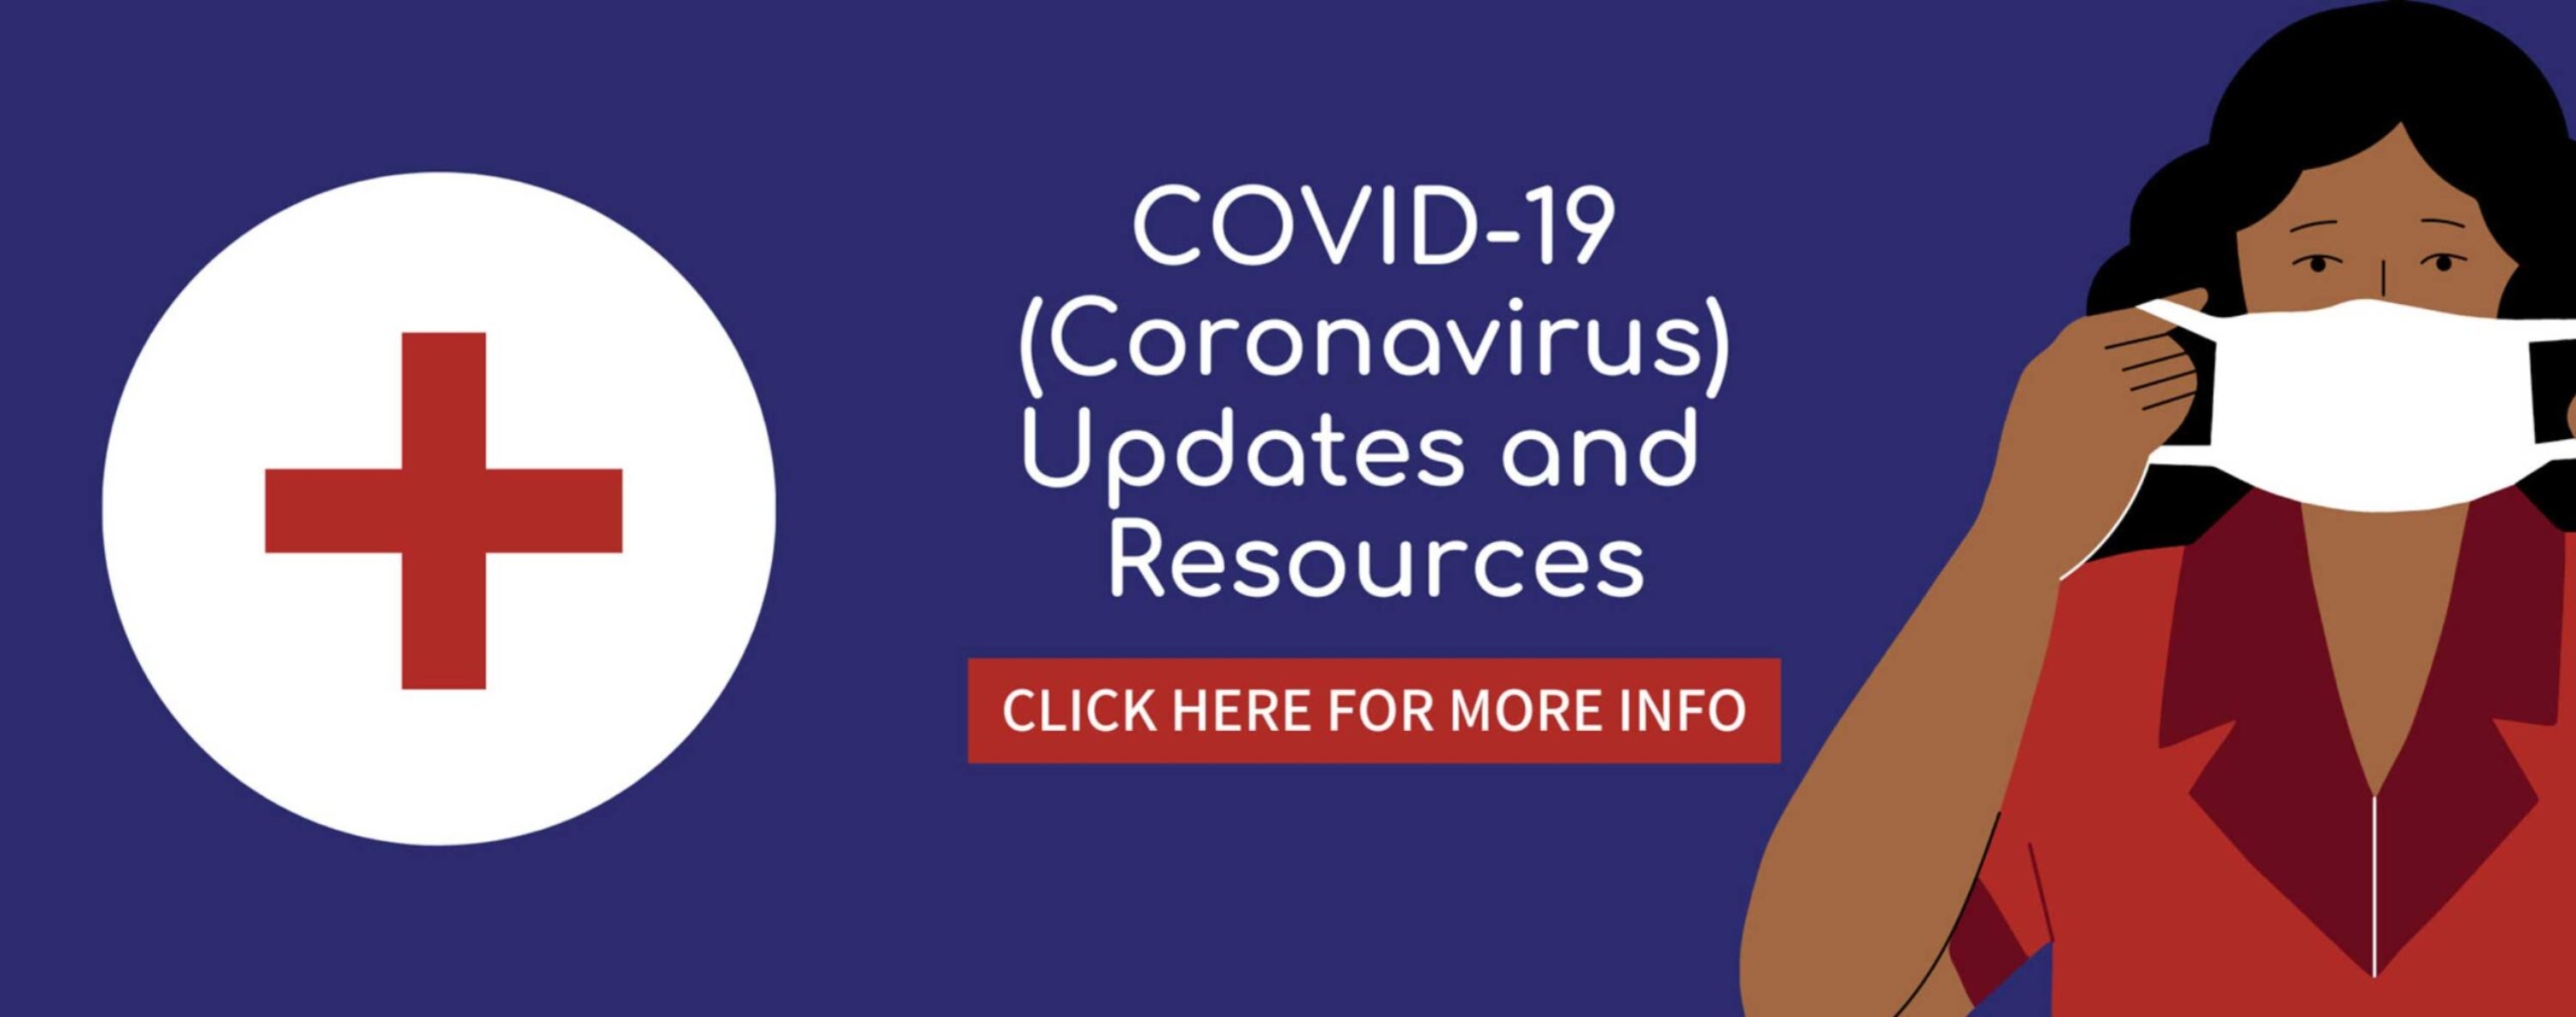 COVID-19 Updates and Resources-- click for more info